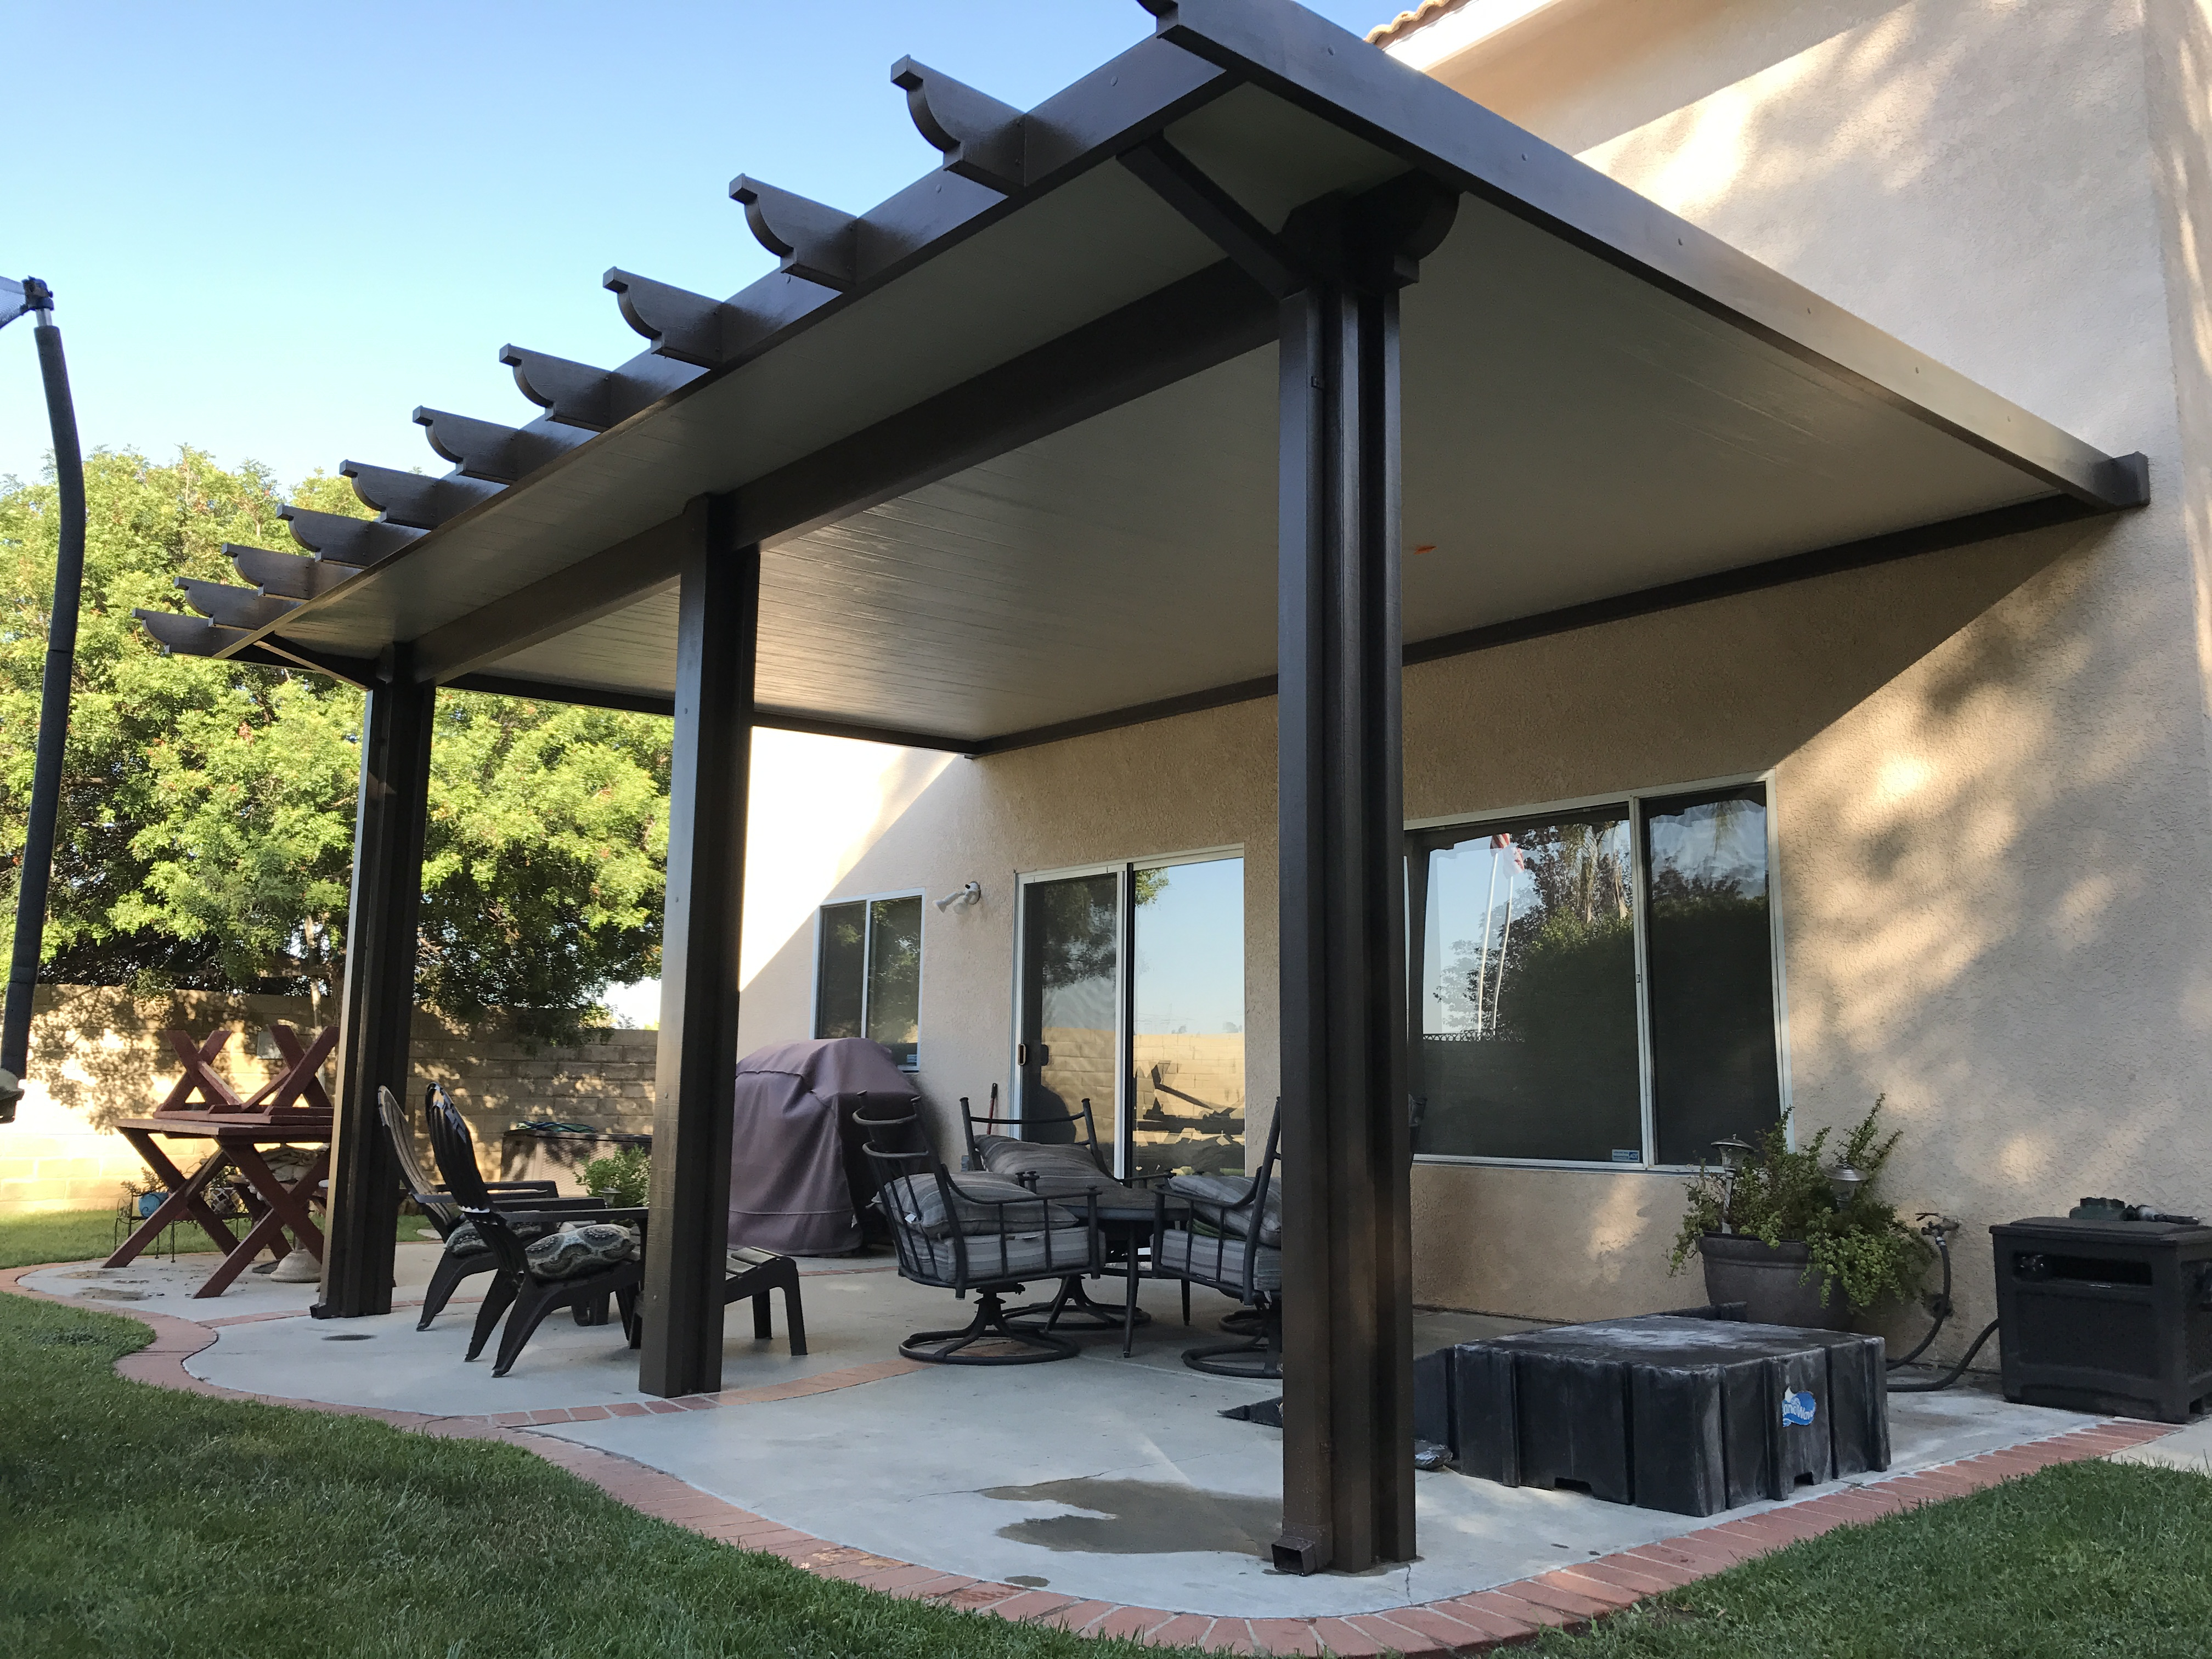 Alumawood Insulated Roofed Patio Cover Patiocovered intended for measurements 4032 X 3024